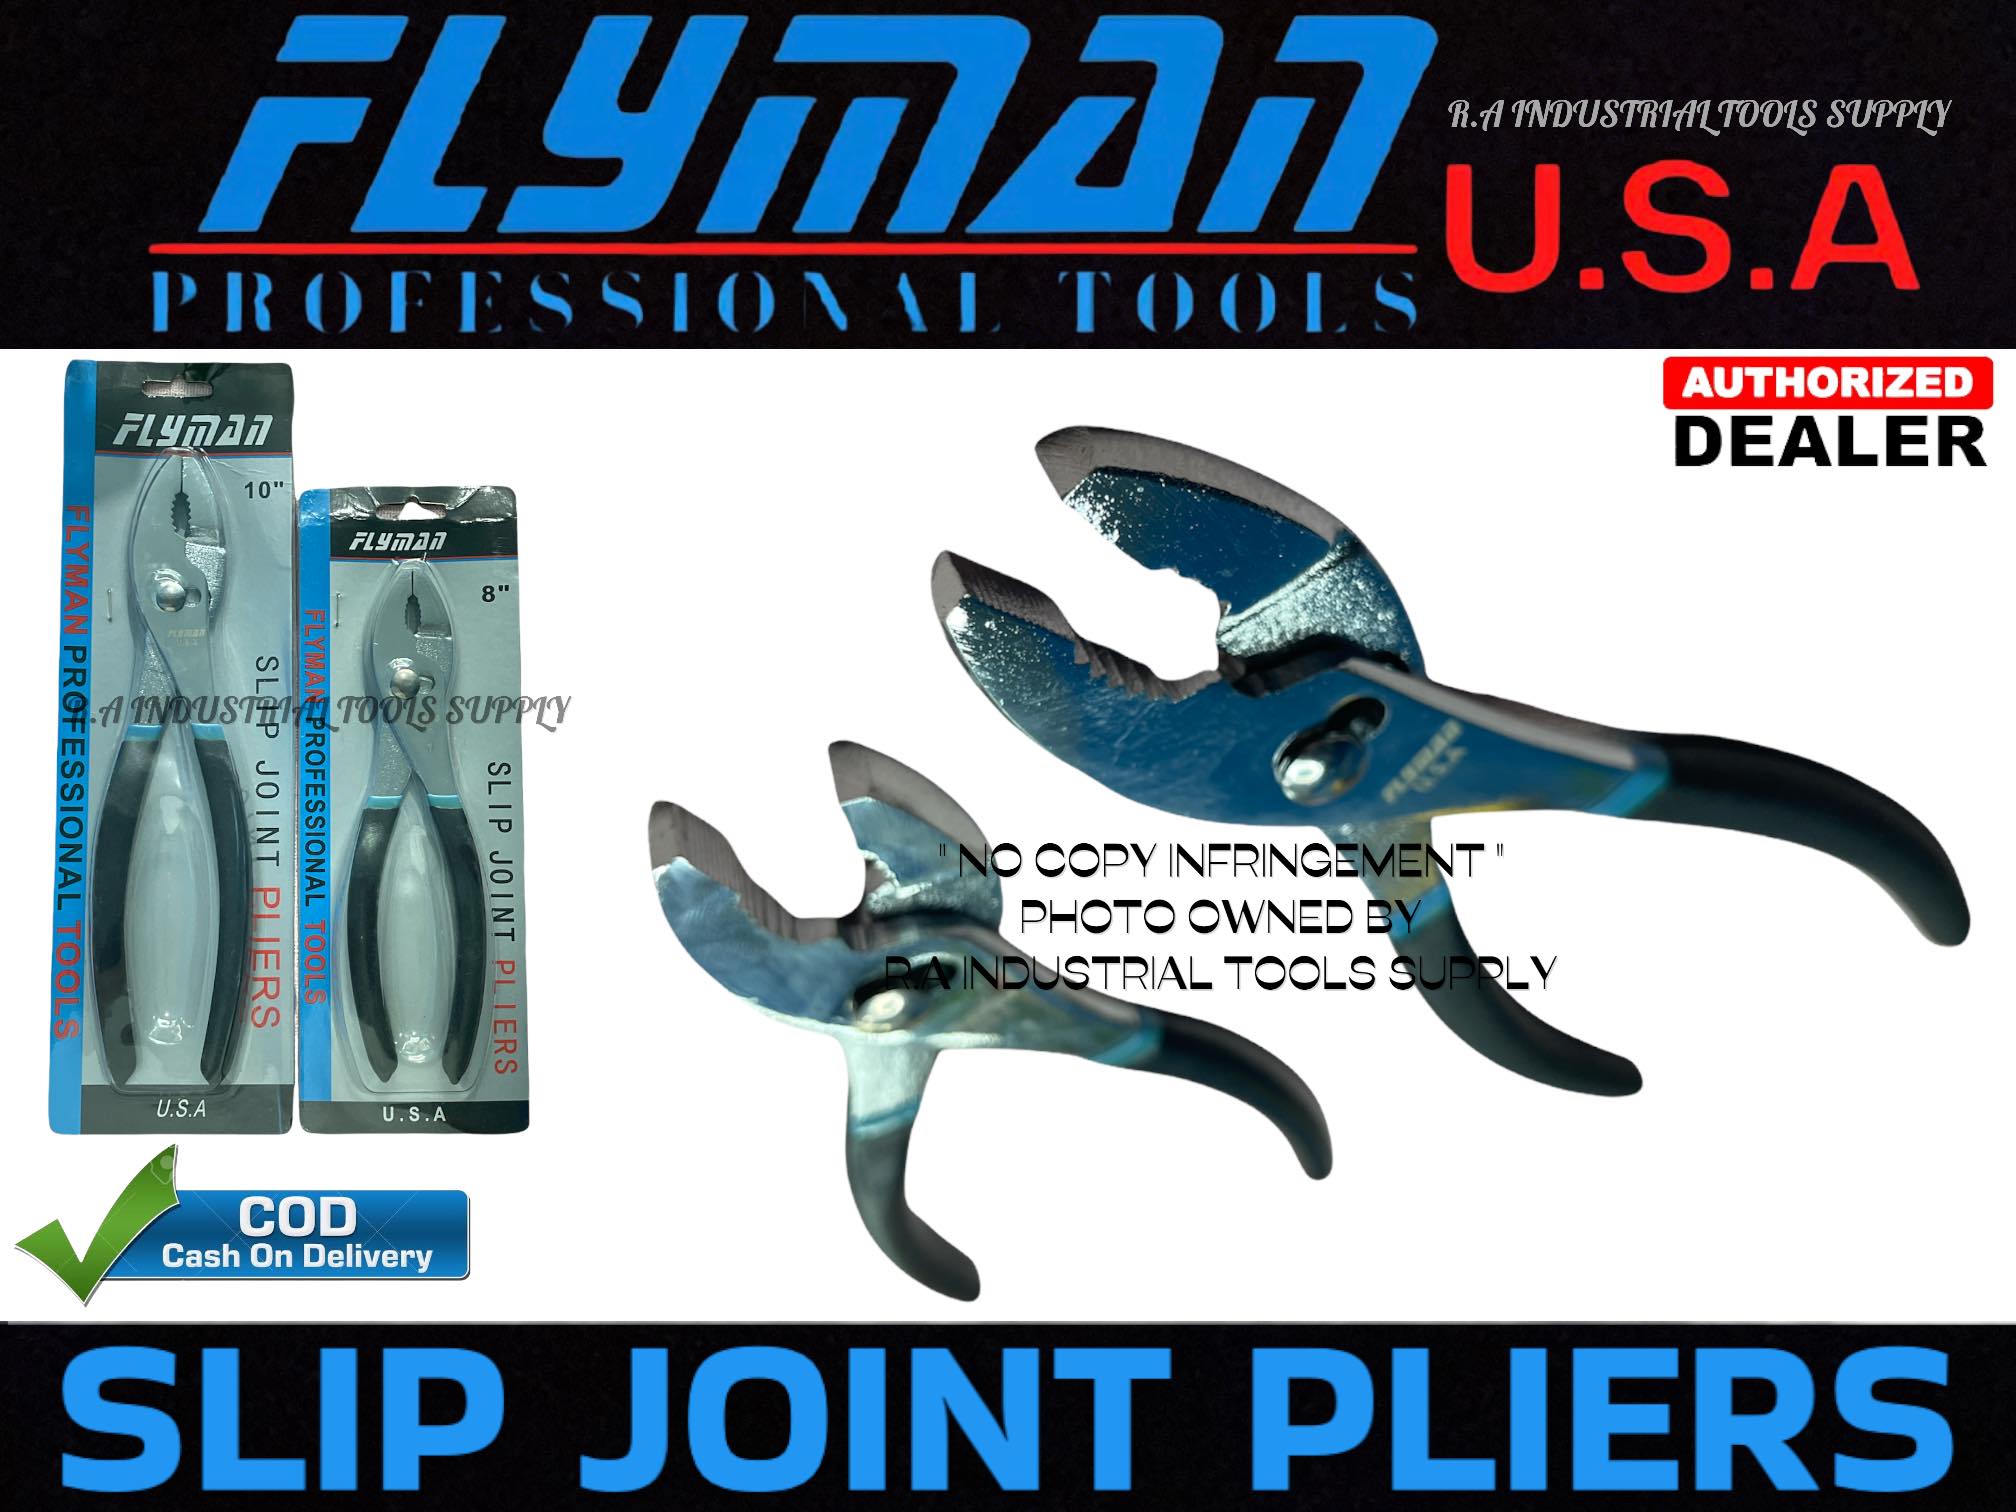 Flyman Slip Joints Pliers 8 Inches And 10 Inches Flyman Tools Original  Supplier ( RA Industrial Tools Supplier )